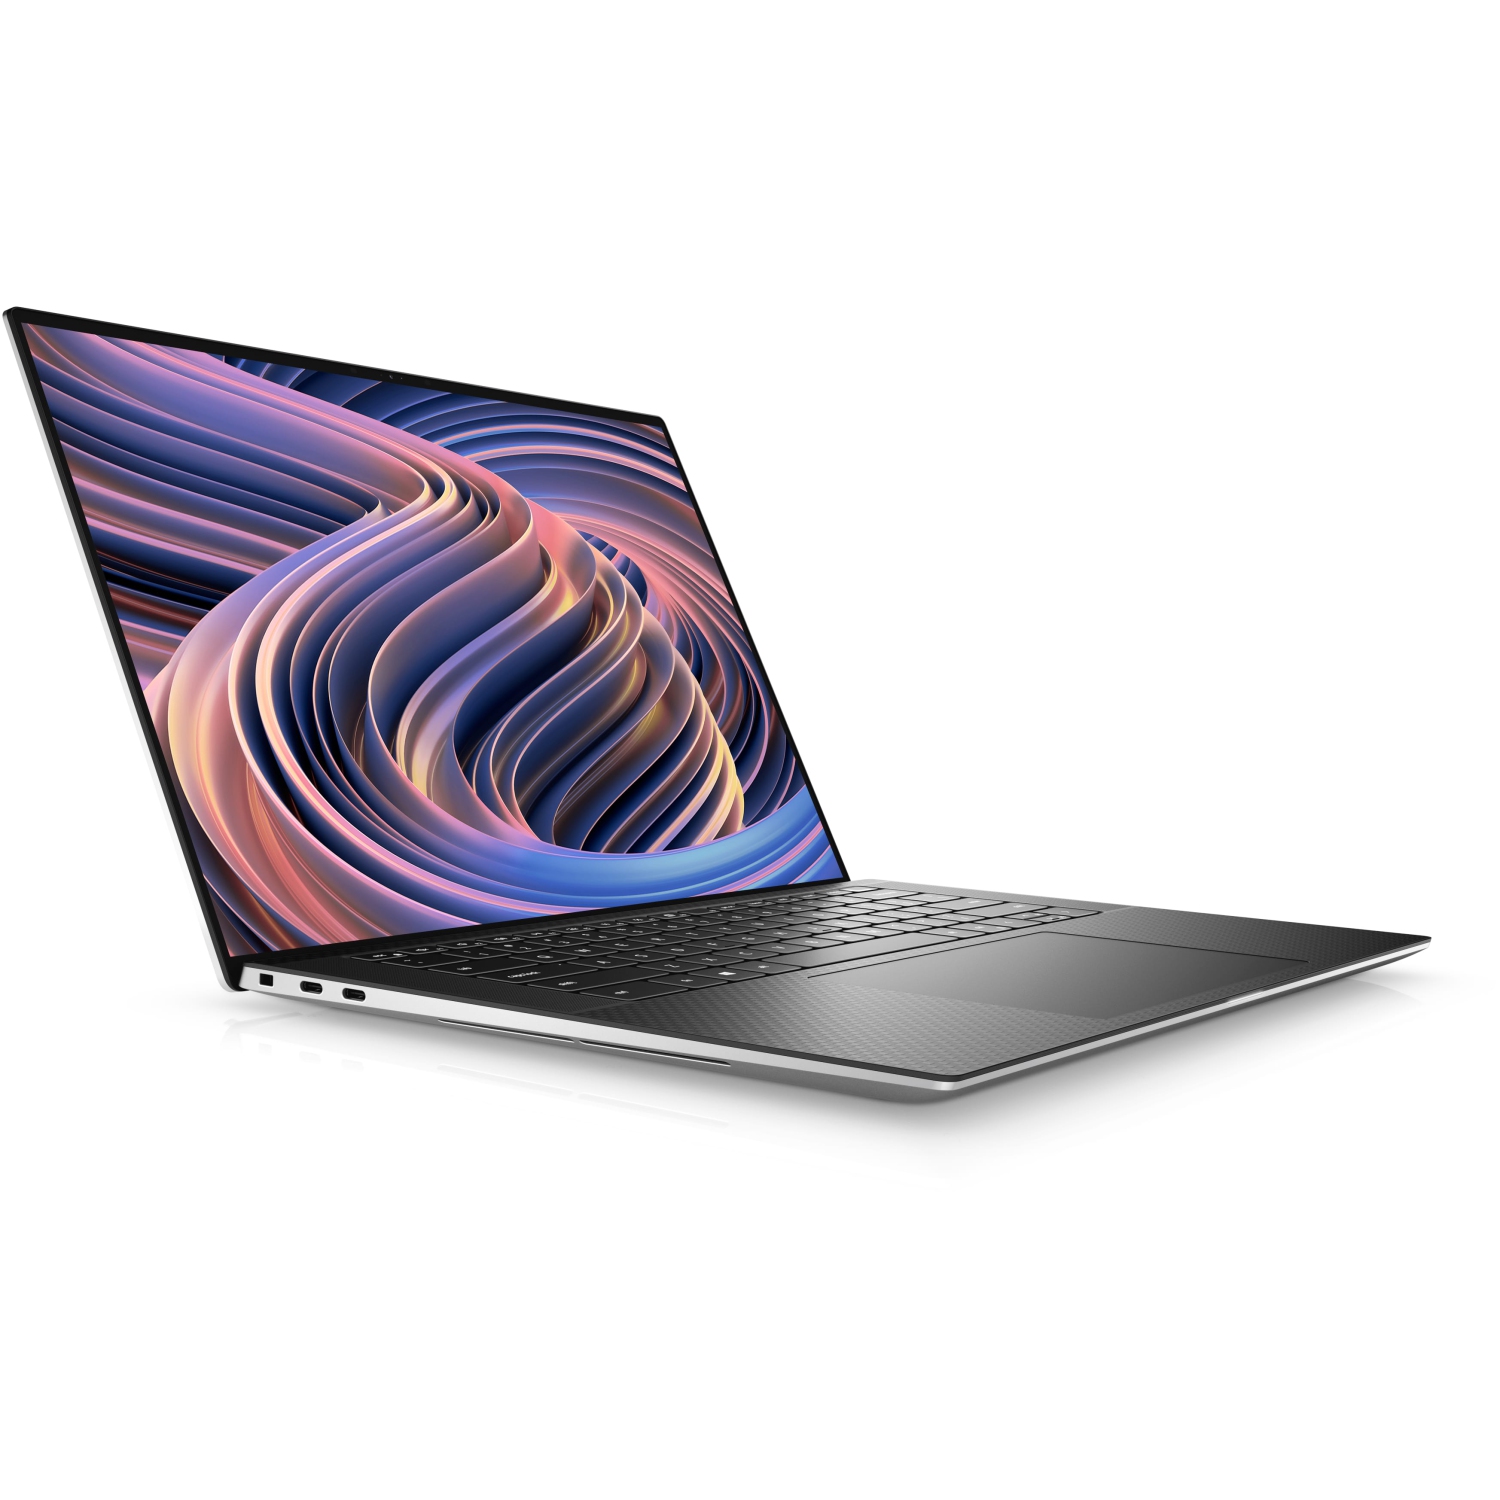 Refurbished (Excellent) - Dell XPS 15 9520, 15" FHD, Nvidia RTX 3050, i7-12700H, 16GB RAM, 512GB SSD, WIN 11 HOME - Certified Refurbished